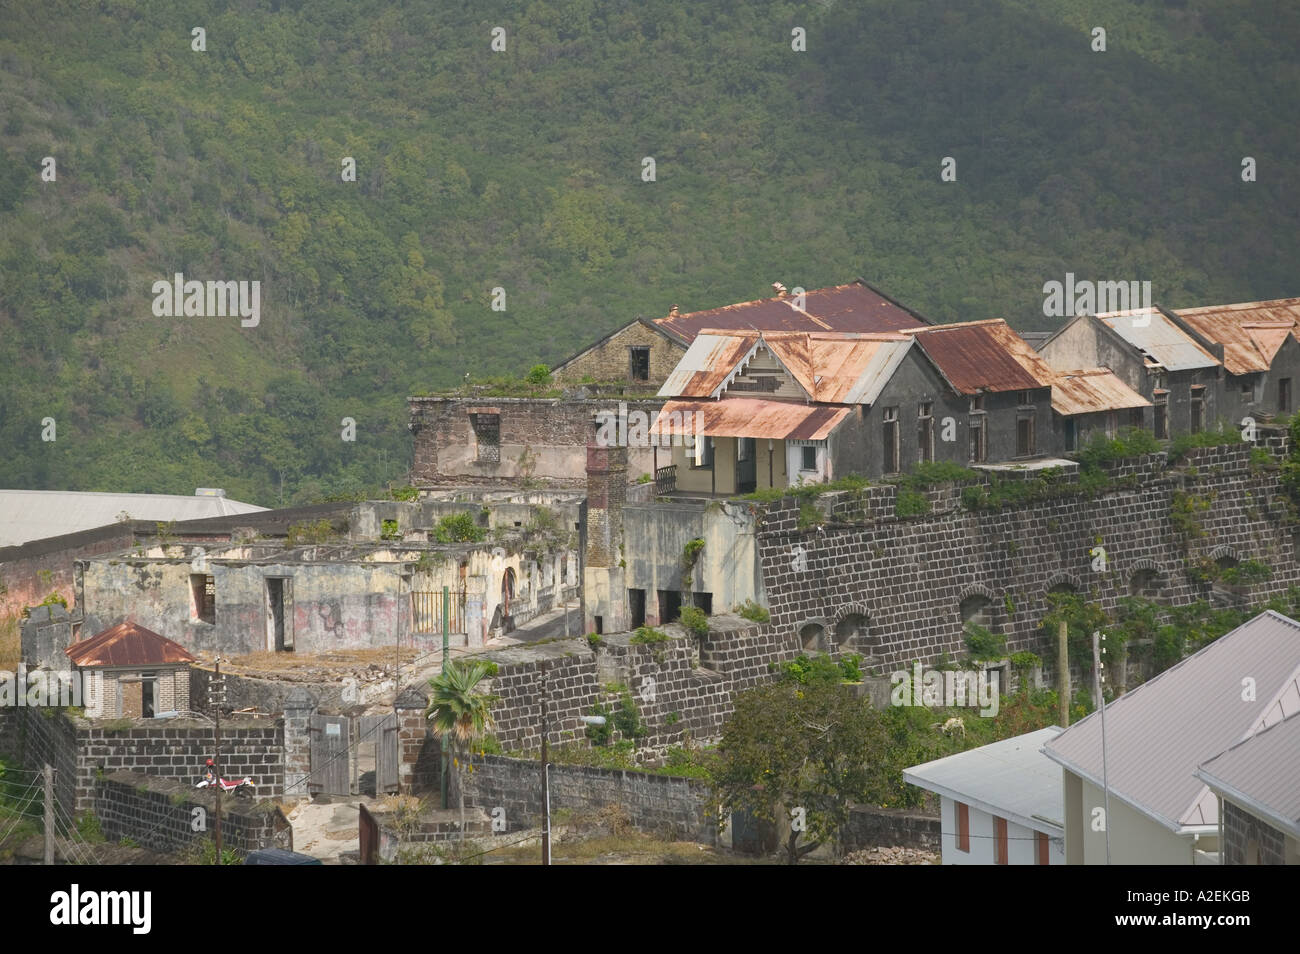 Caribbean, GRENADA, St. George's: Ruins of Fort Matthew, destroyed by US forces in 1983 invasion Stock Photo